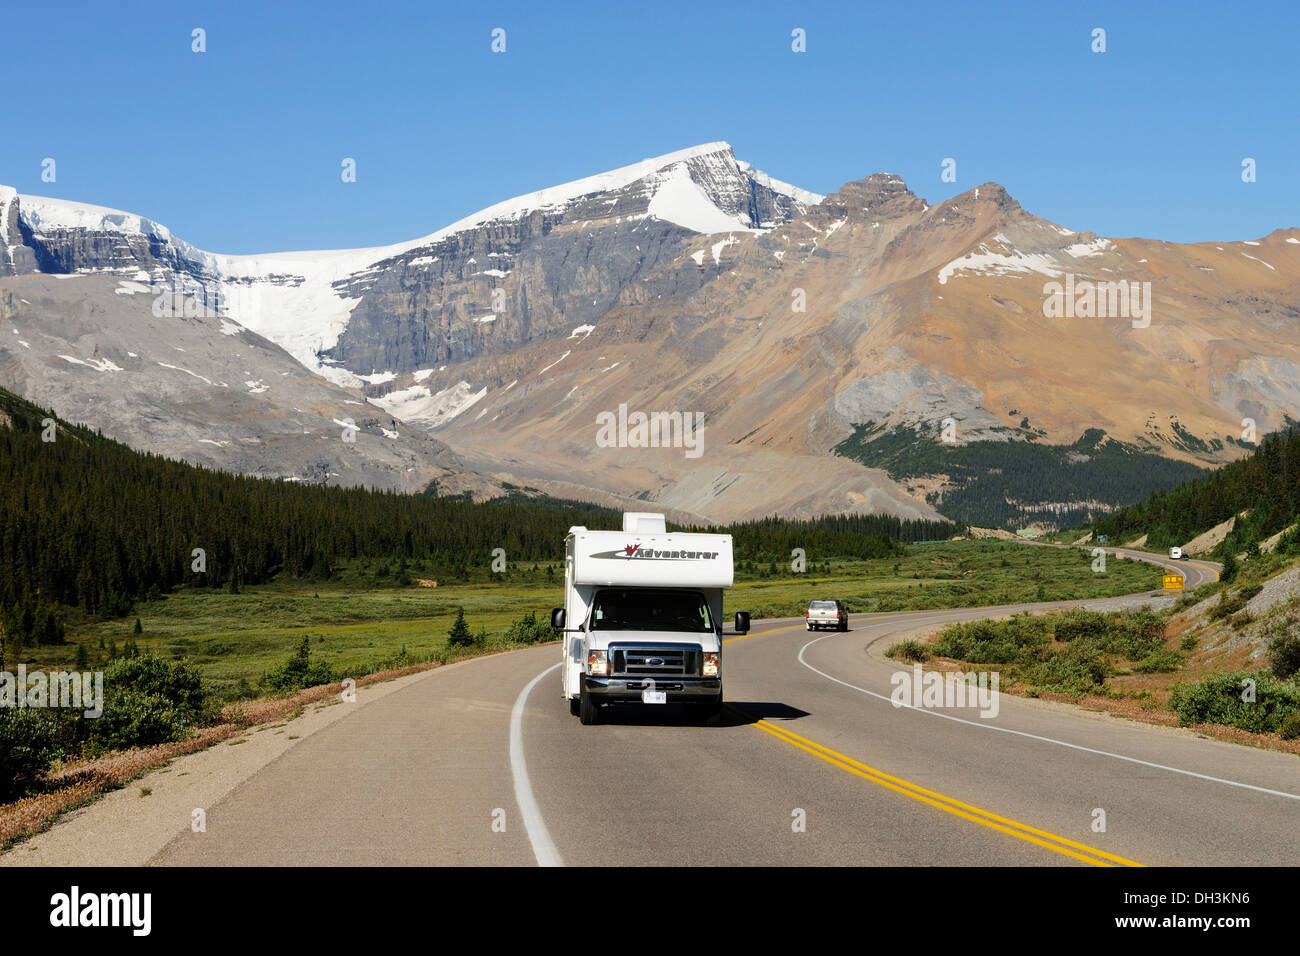 Camper on the Icefields Parkway through the Rocky Mountains, Jasper National Park, Alberta Province, Canada Stock Photo